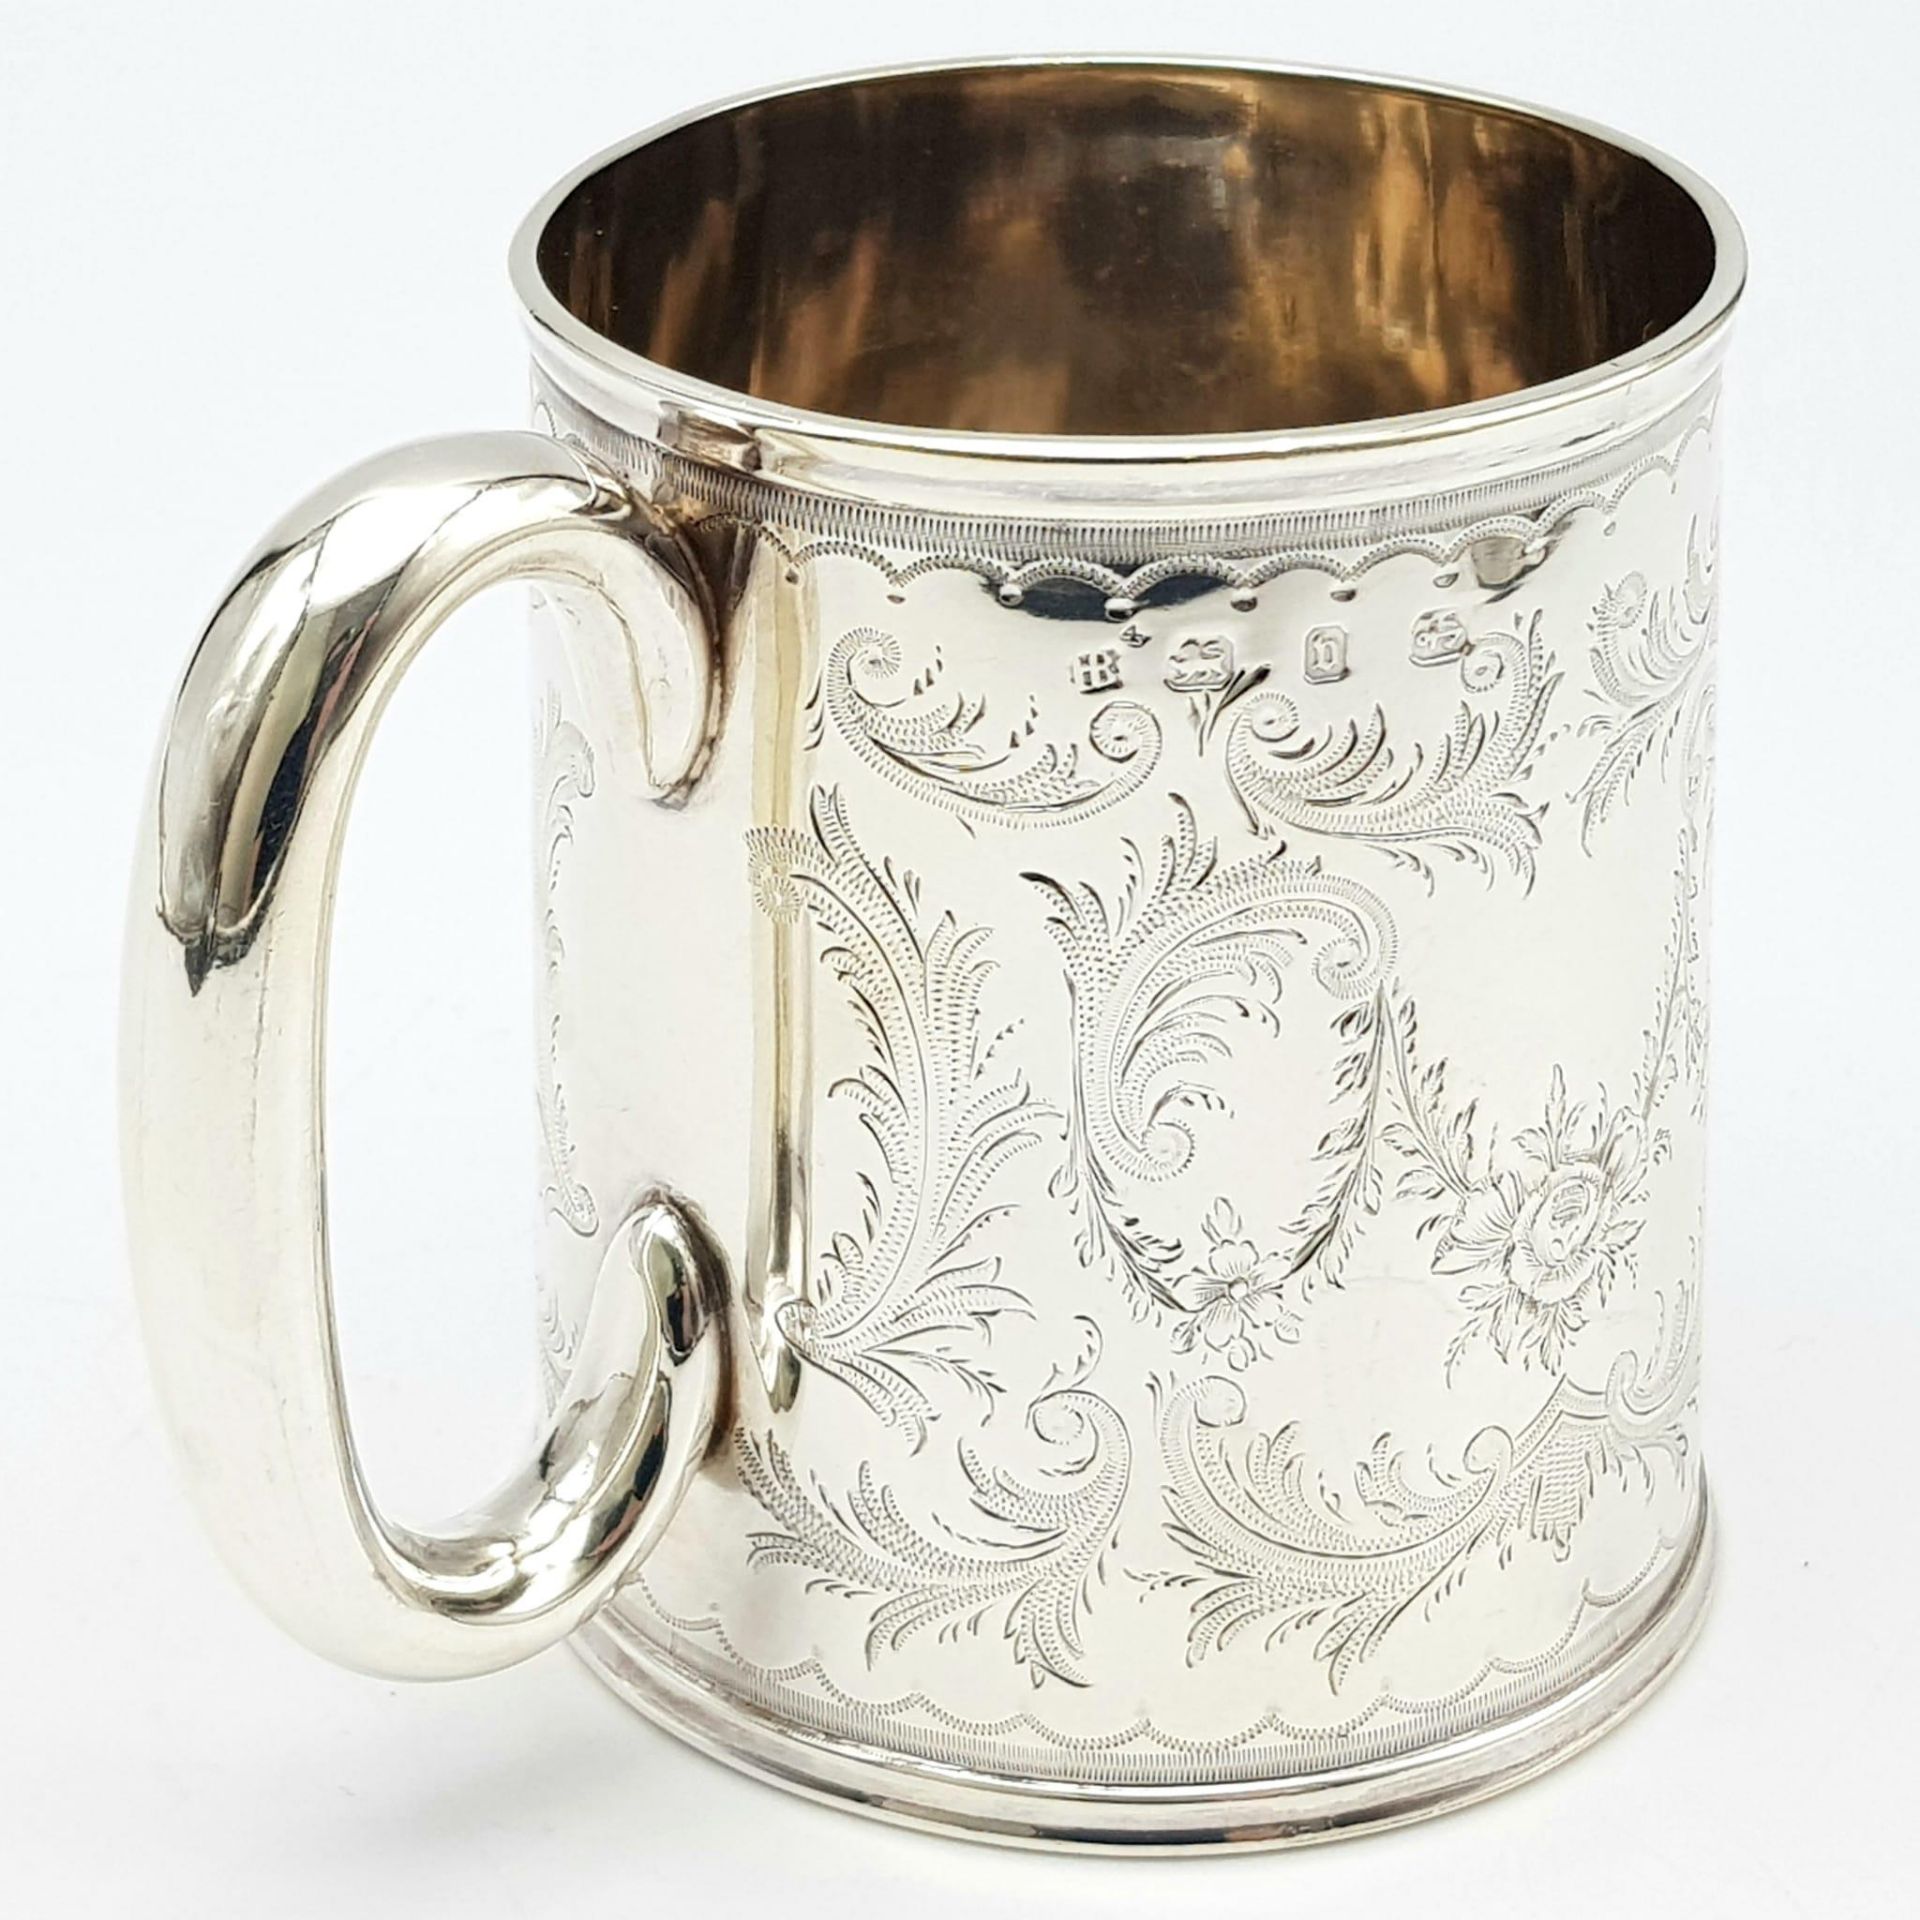 AN ANTIQUE SILVER TANKARD INSCRIBED "PHILIP OCTOBER 23rd 1894" ALL HAND ENGRAVED BY A MASTER - Image 4 of 8